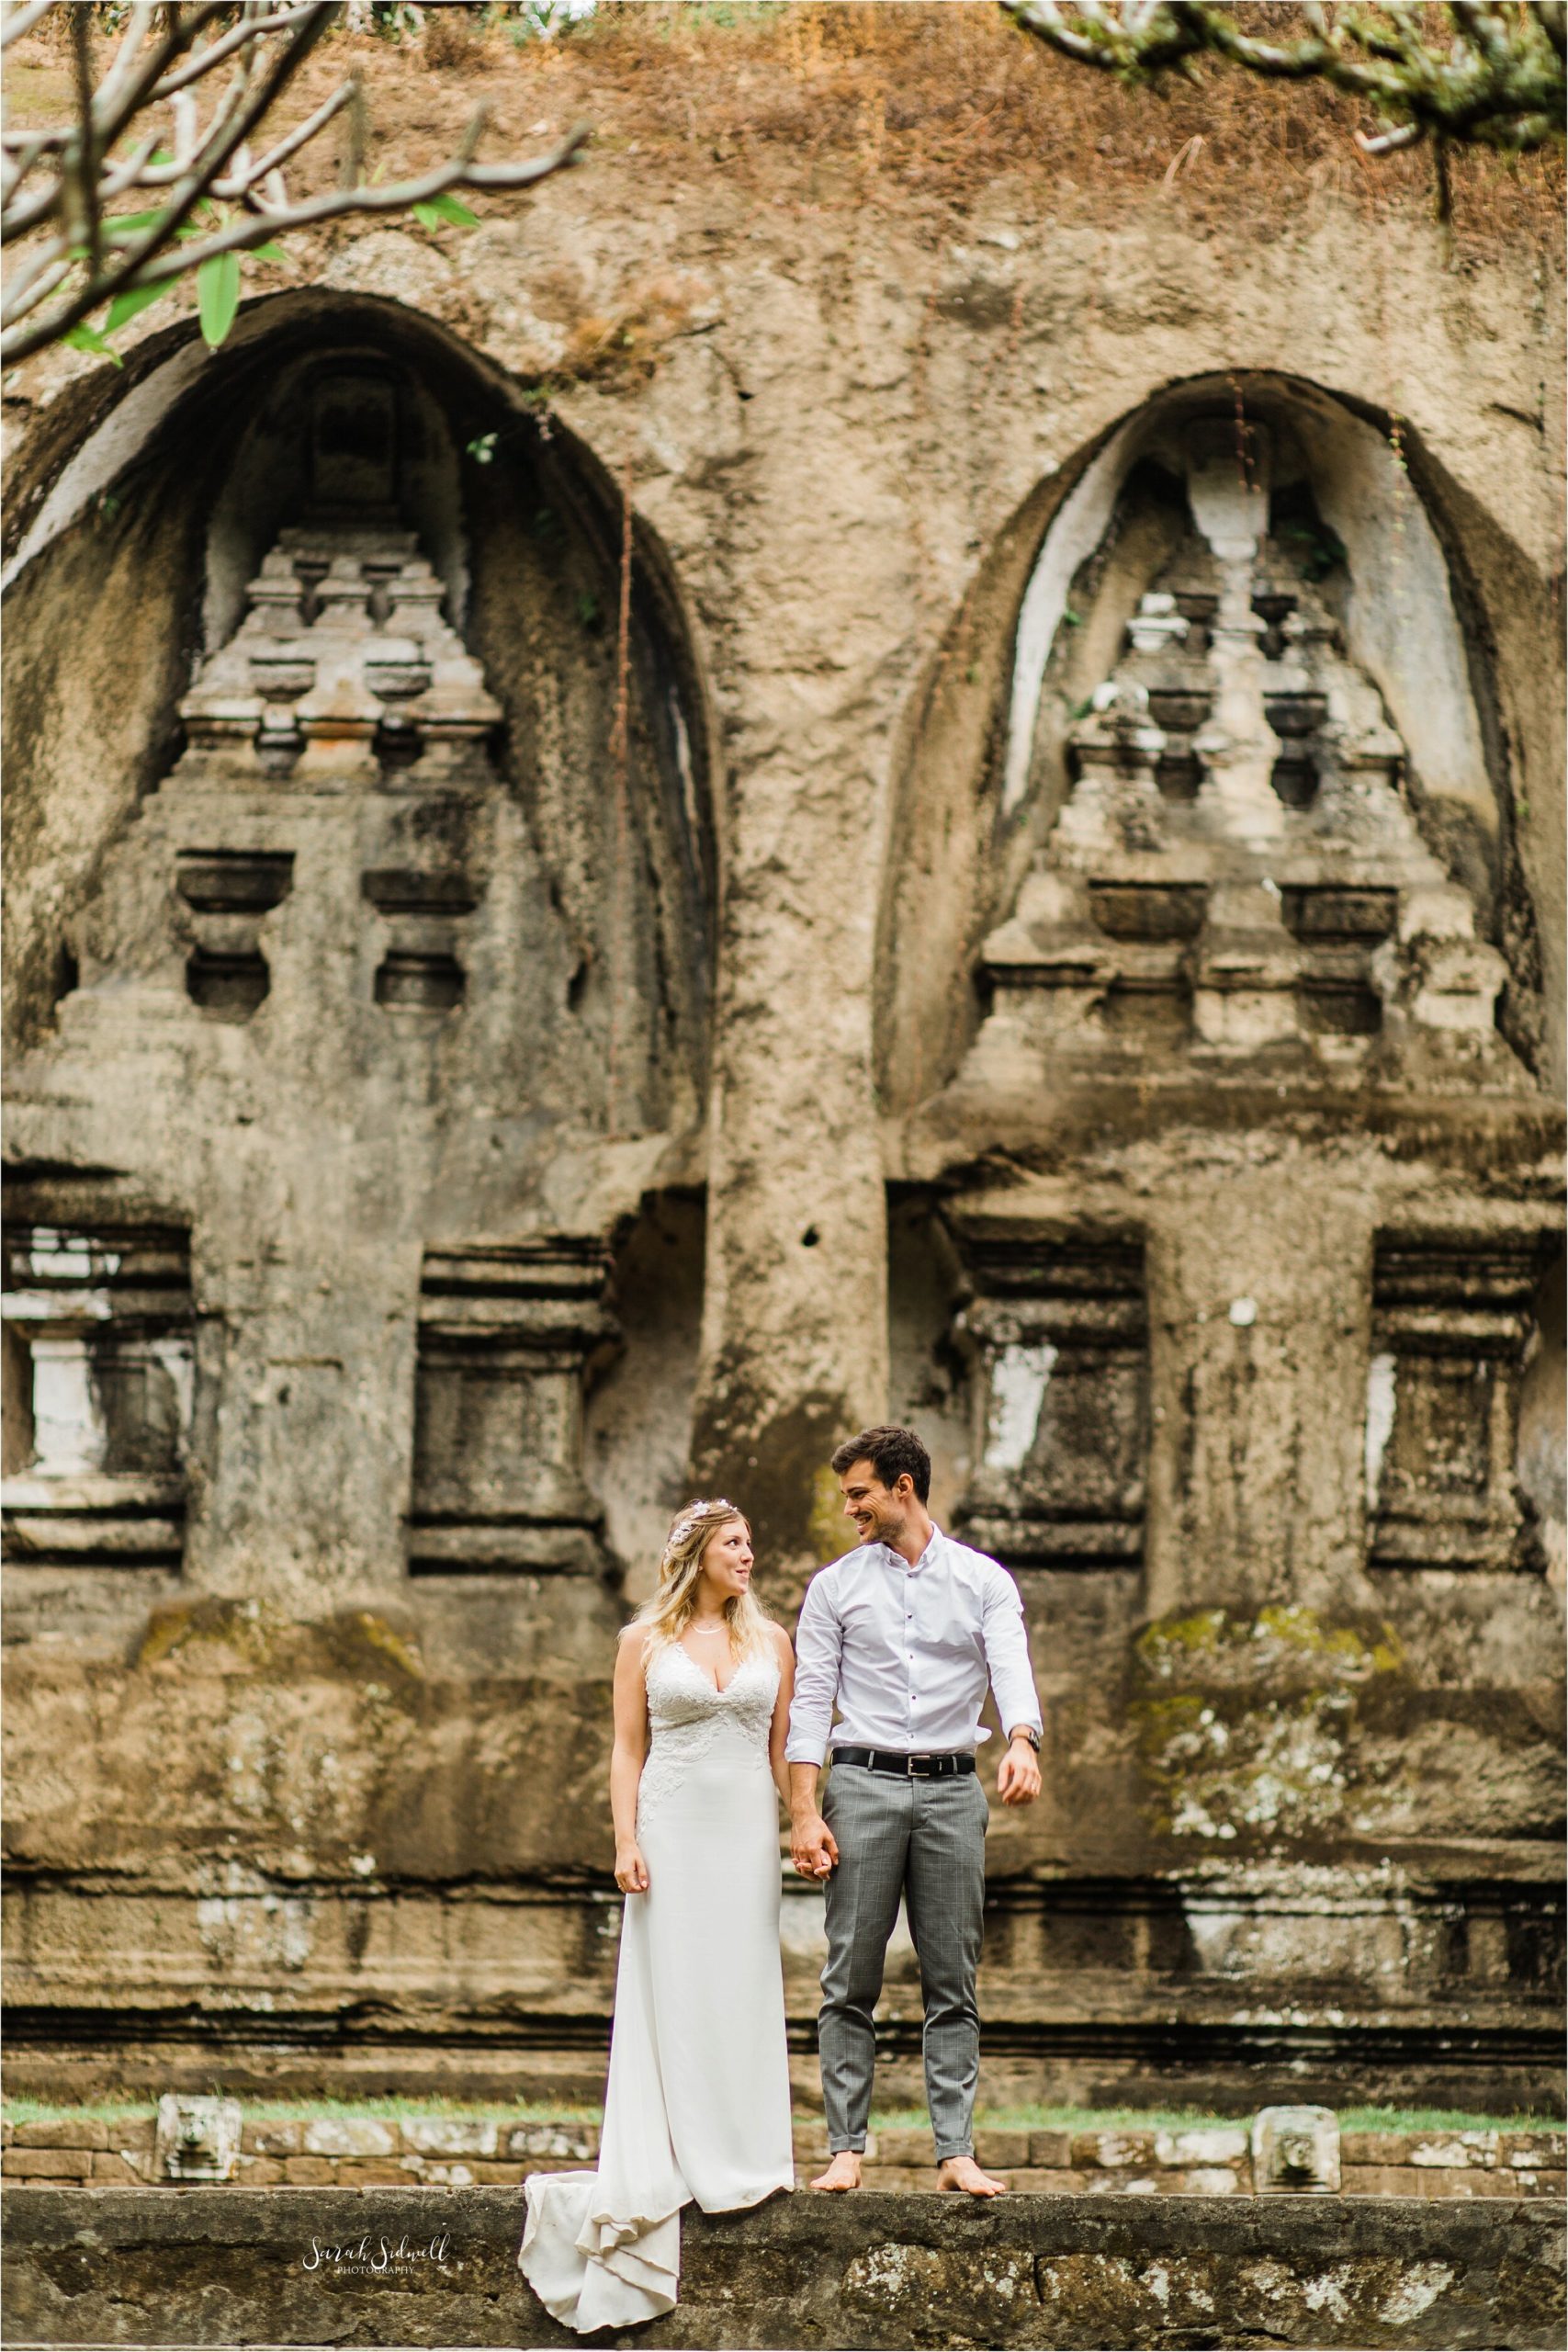 Day After Wedding Photo | Adventure Session in Bali